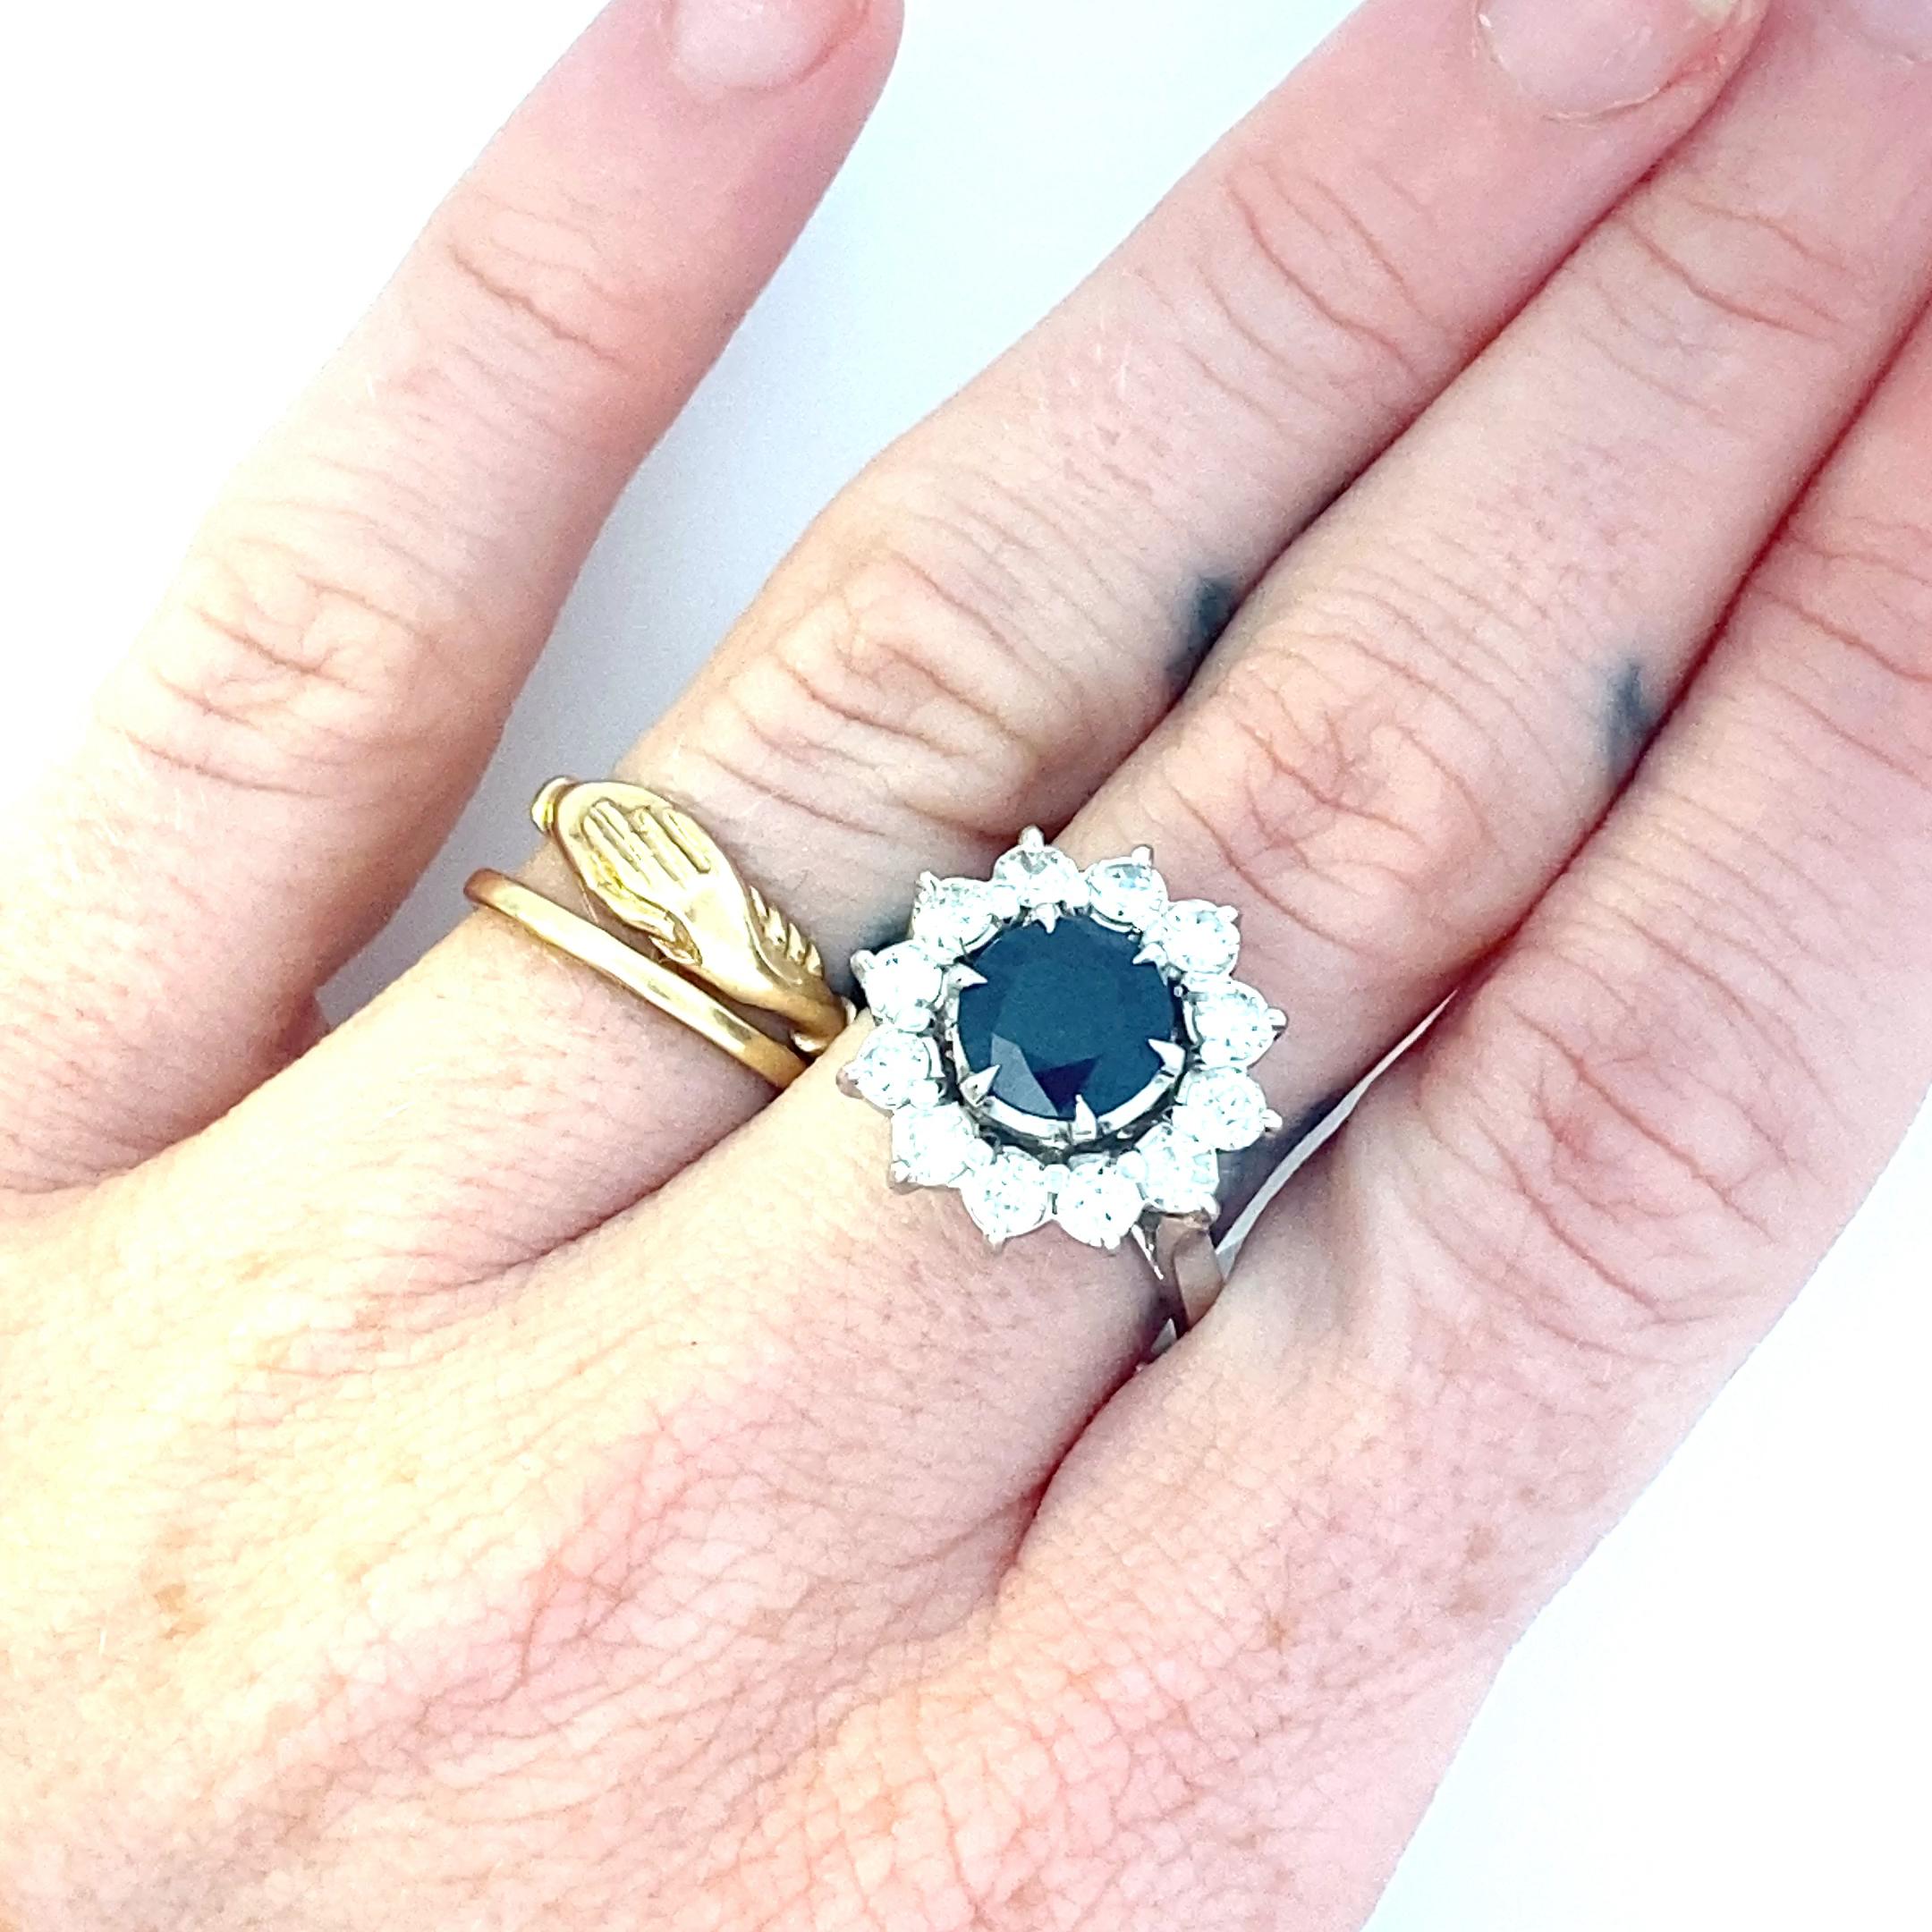 This is an incredible cocktail ring featuring a deep dark blue heat treated ceylon sapphire measuring approximately 8mm in diameter, weighing in at 2.23 carats. Set high above a 2mm band this ring also features a gorgeous diamond halo, more than